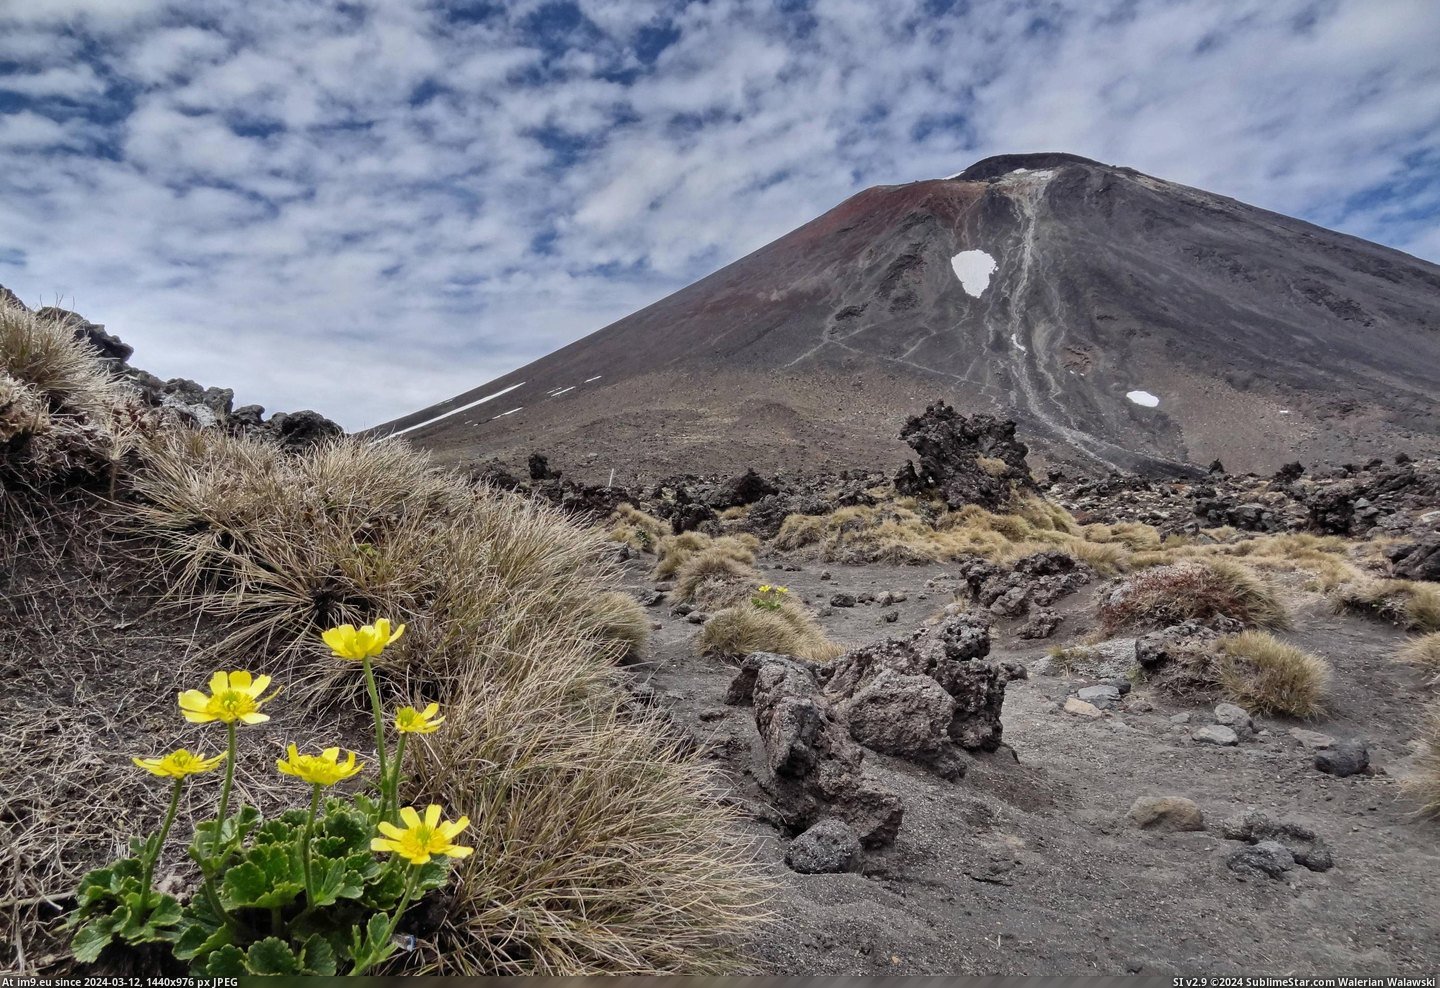 #Aka #Mount #Zealand #Rings #Volcanic #Doom #Flowers #Base #Lord [Earthporn] Flowers at the base of volcanic Mount Ngauruhoe, New Zealand (AKA 'Mount Doom' from Lord of the Rings)  [4608x3144] Pic. (Bild von album My r/EARTHPORN favs))